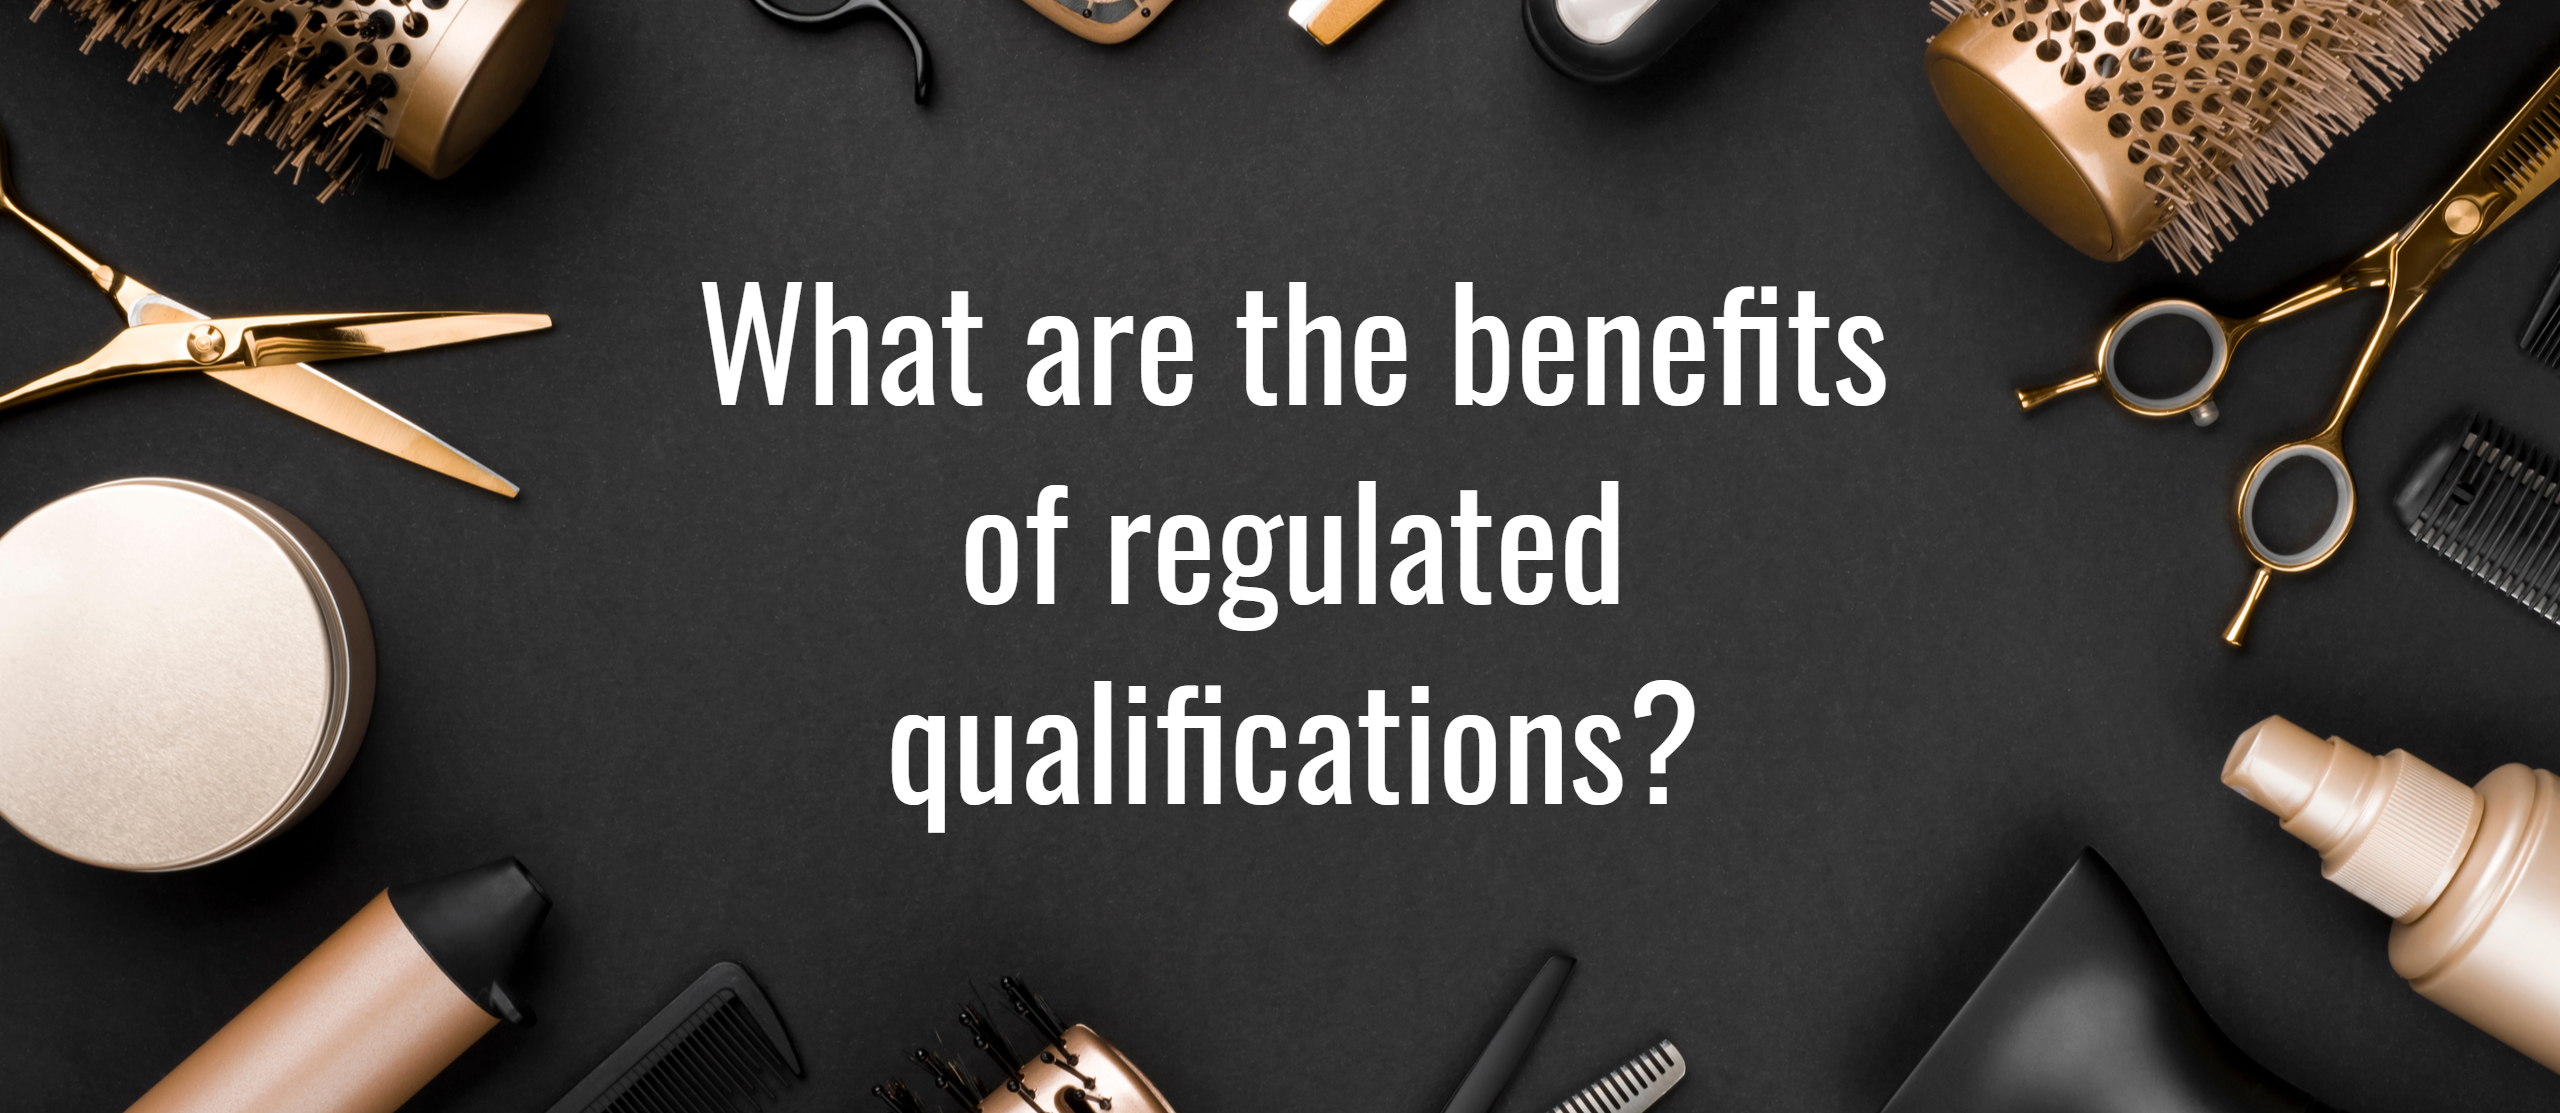 benefits of regulated qualifications